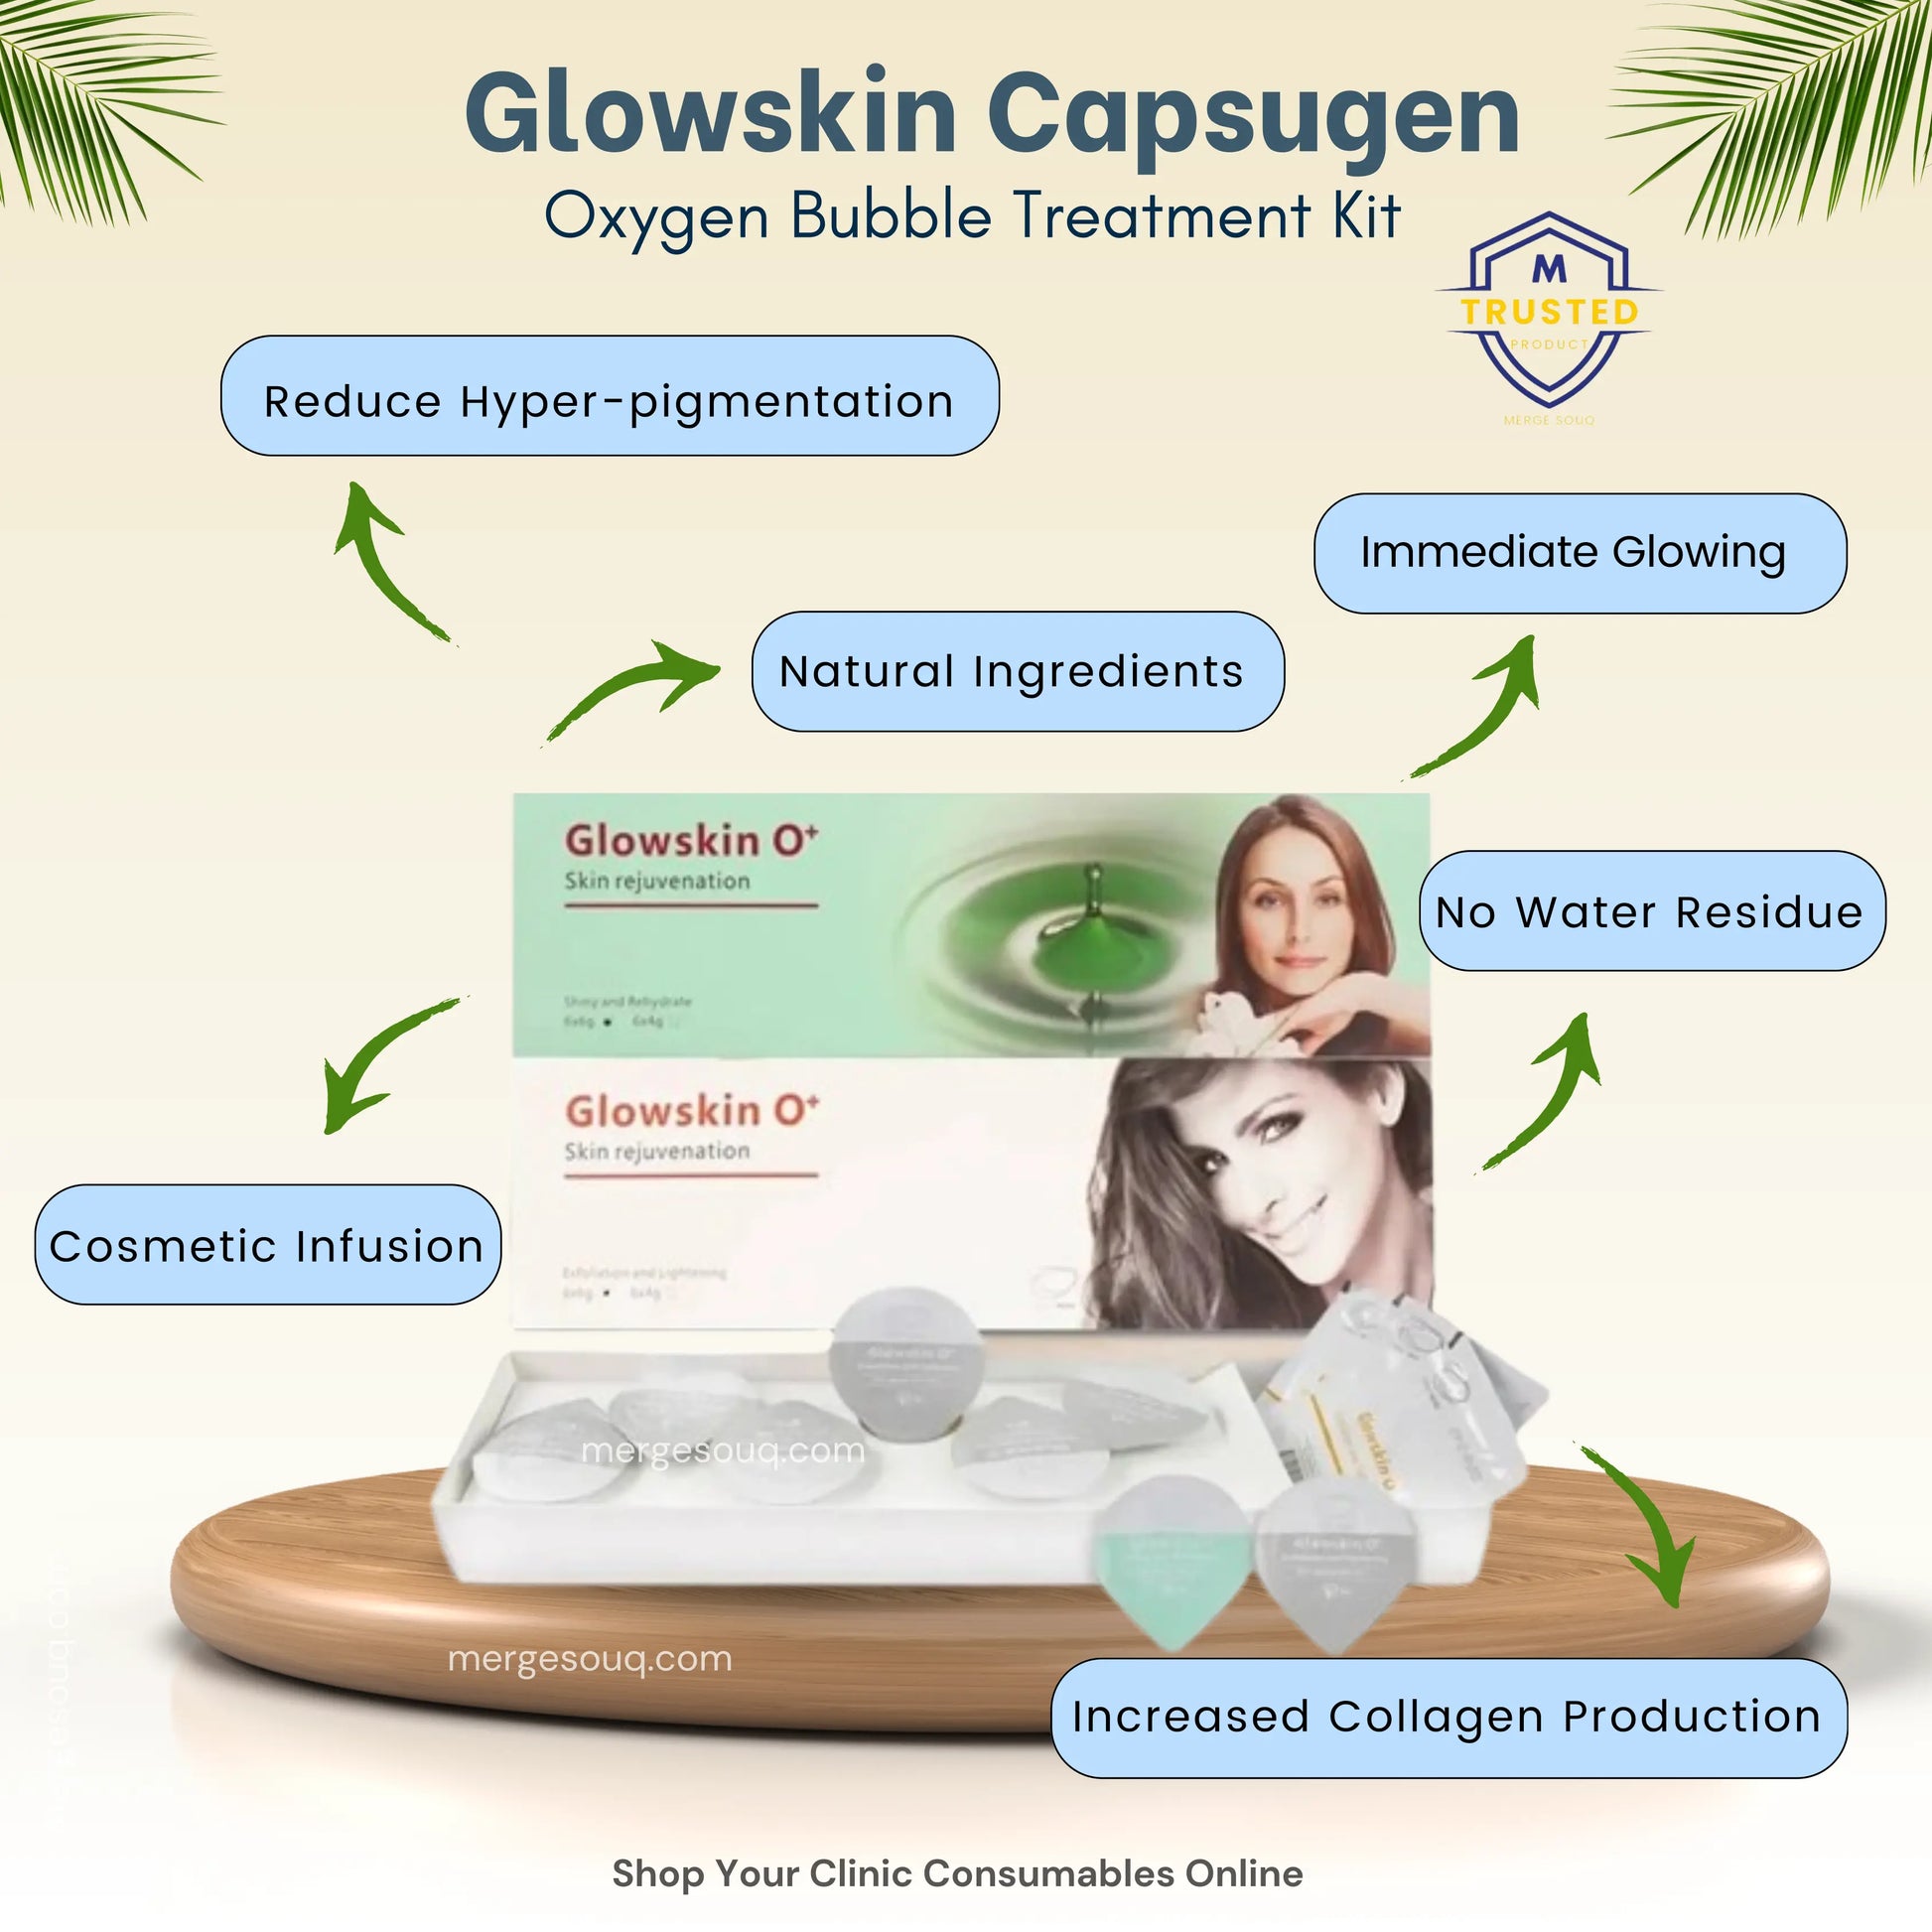 Glowskin O+ Green| For Shining & Rehydrating| Skin Rejuvenation Pod| Oxygen Small Bubble Capsules| For Facial Therapy Devices